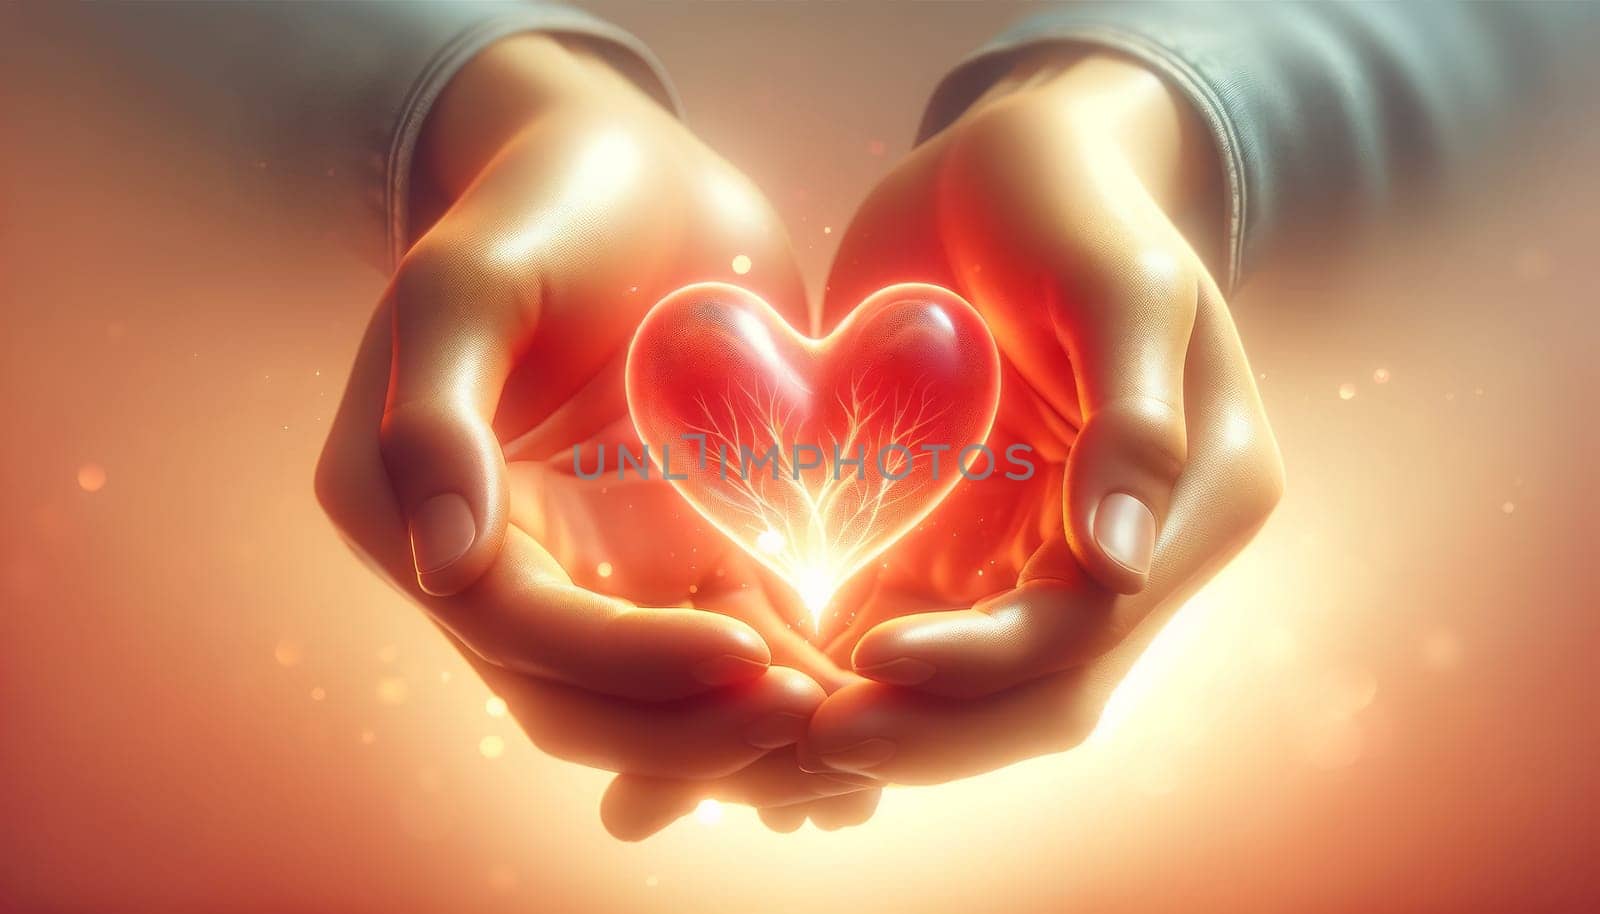 A digital illustration of two pairs of hands gently holding a translucent red heart together. The heart is gleaming with light, symbolizing warmth, love, and care. The hands are cradling the heart carefully, with the fingertips touching, creating an intimate and protective gesture. The background is softly focused with a warm light that enhances the heart's glow, and the overall mood of the illustration is one of tenderness and compassion.